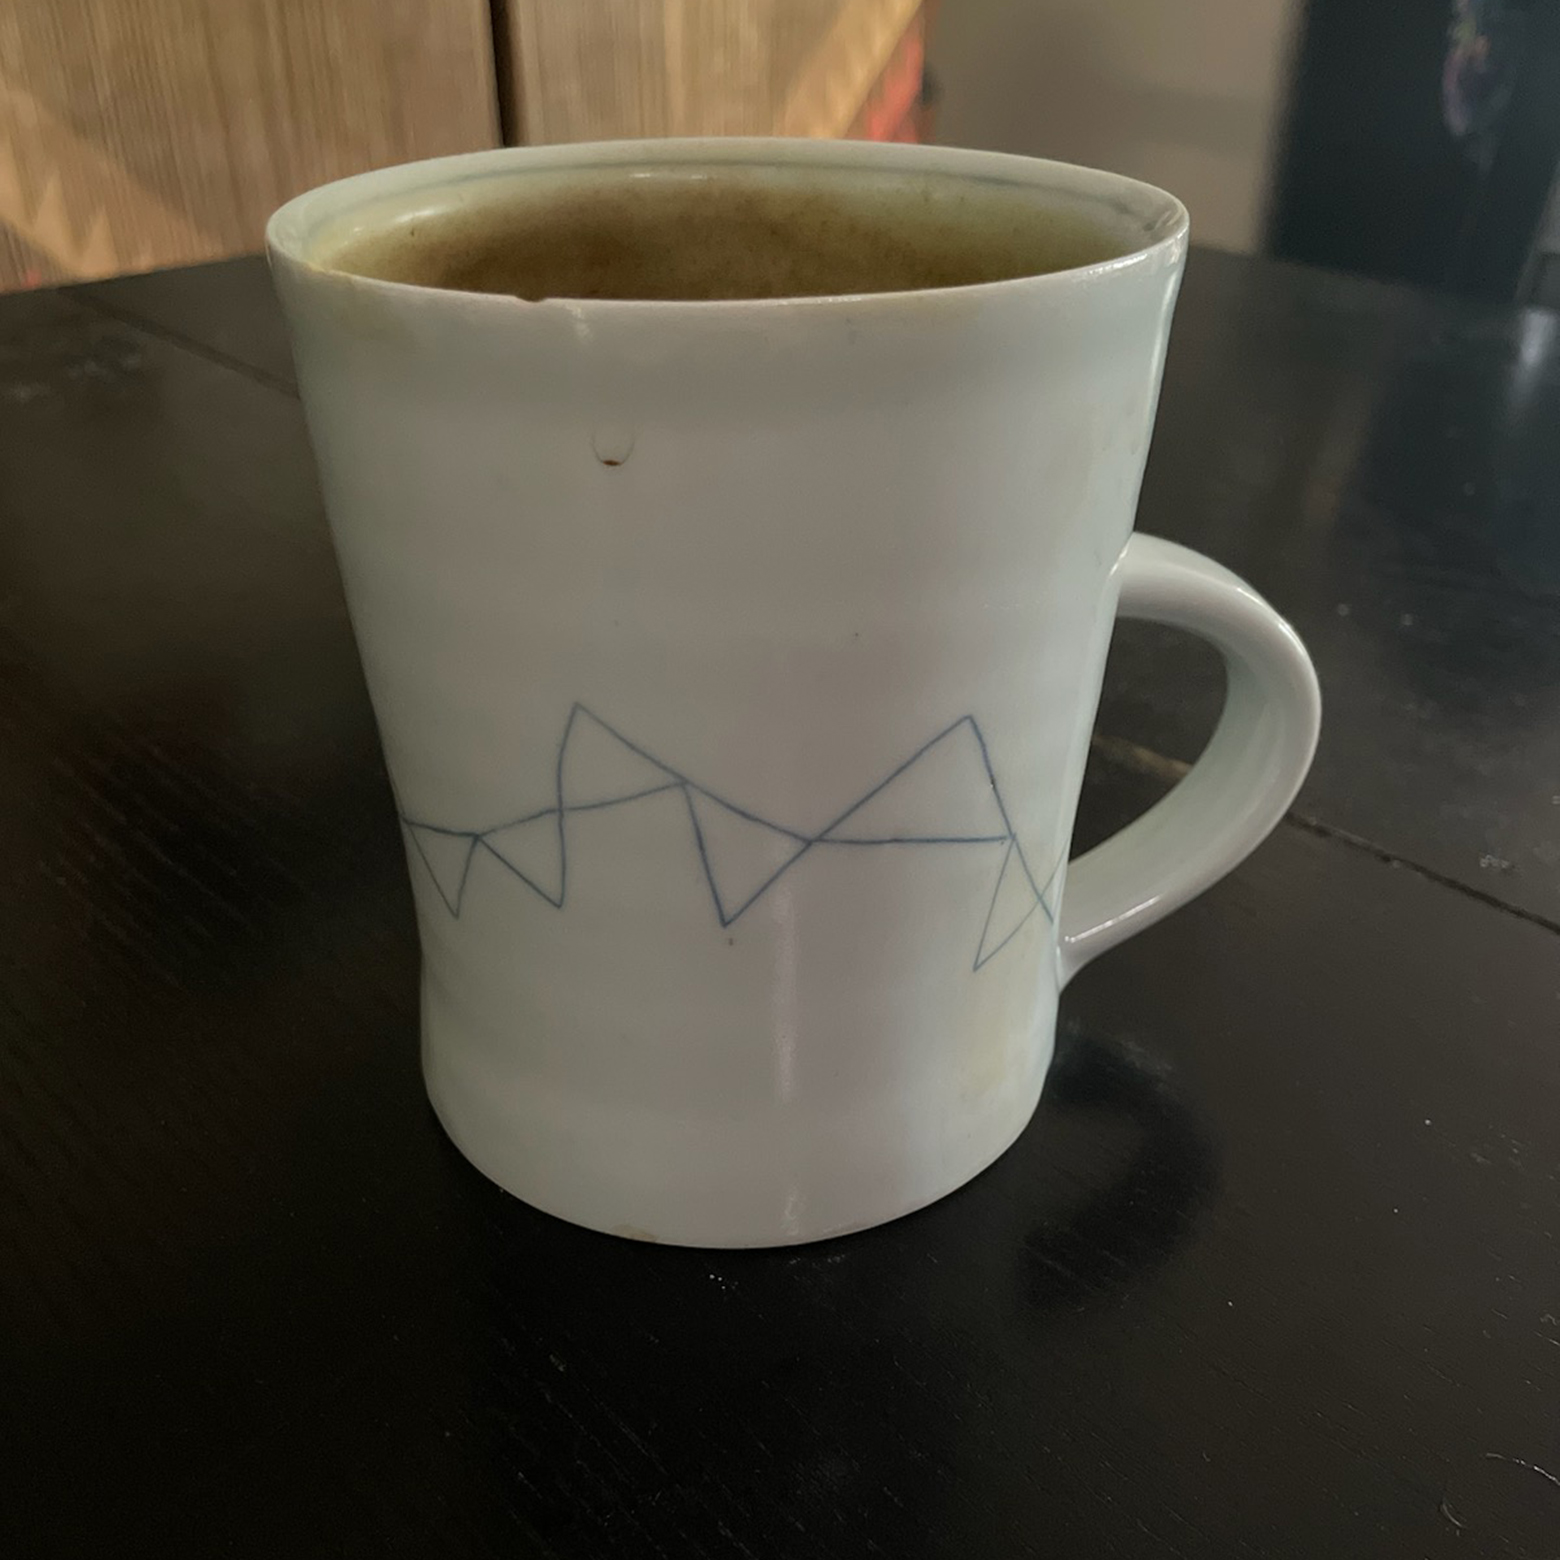 A white coffee mug on a table with the outlines of several triangles along a line with some above the line and some below.